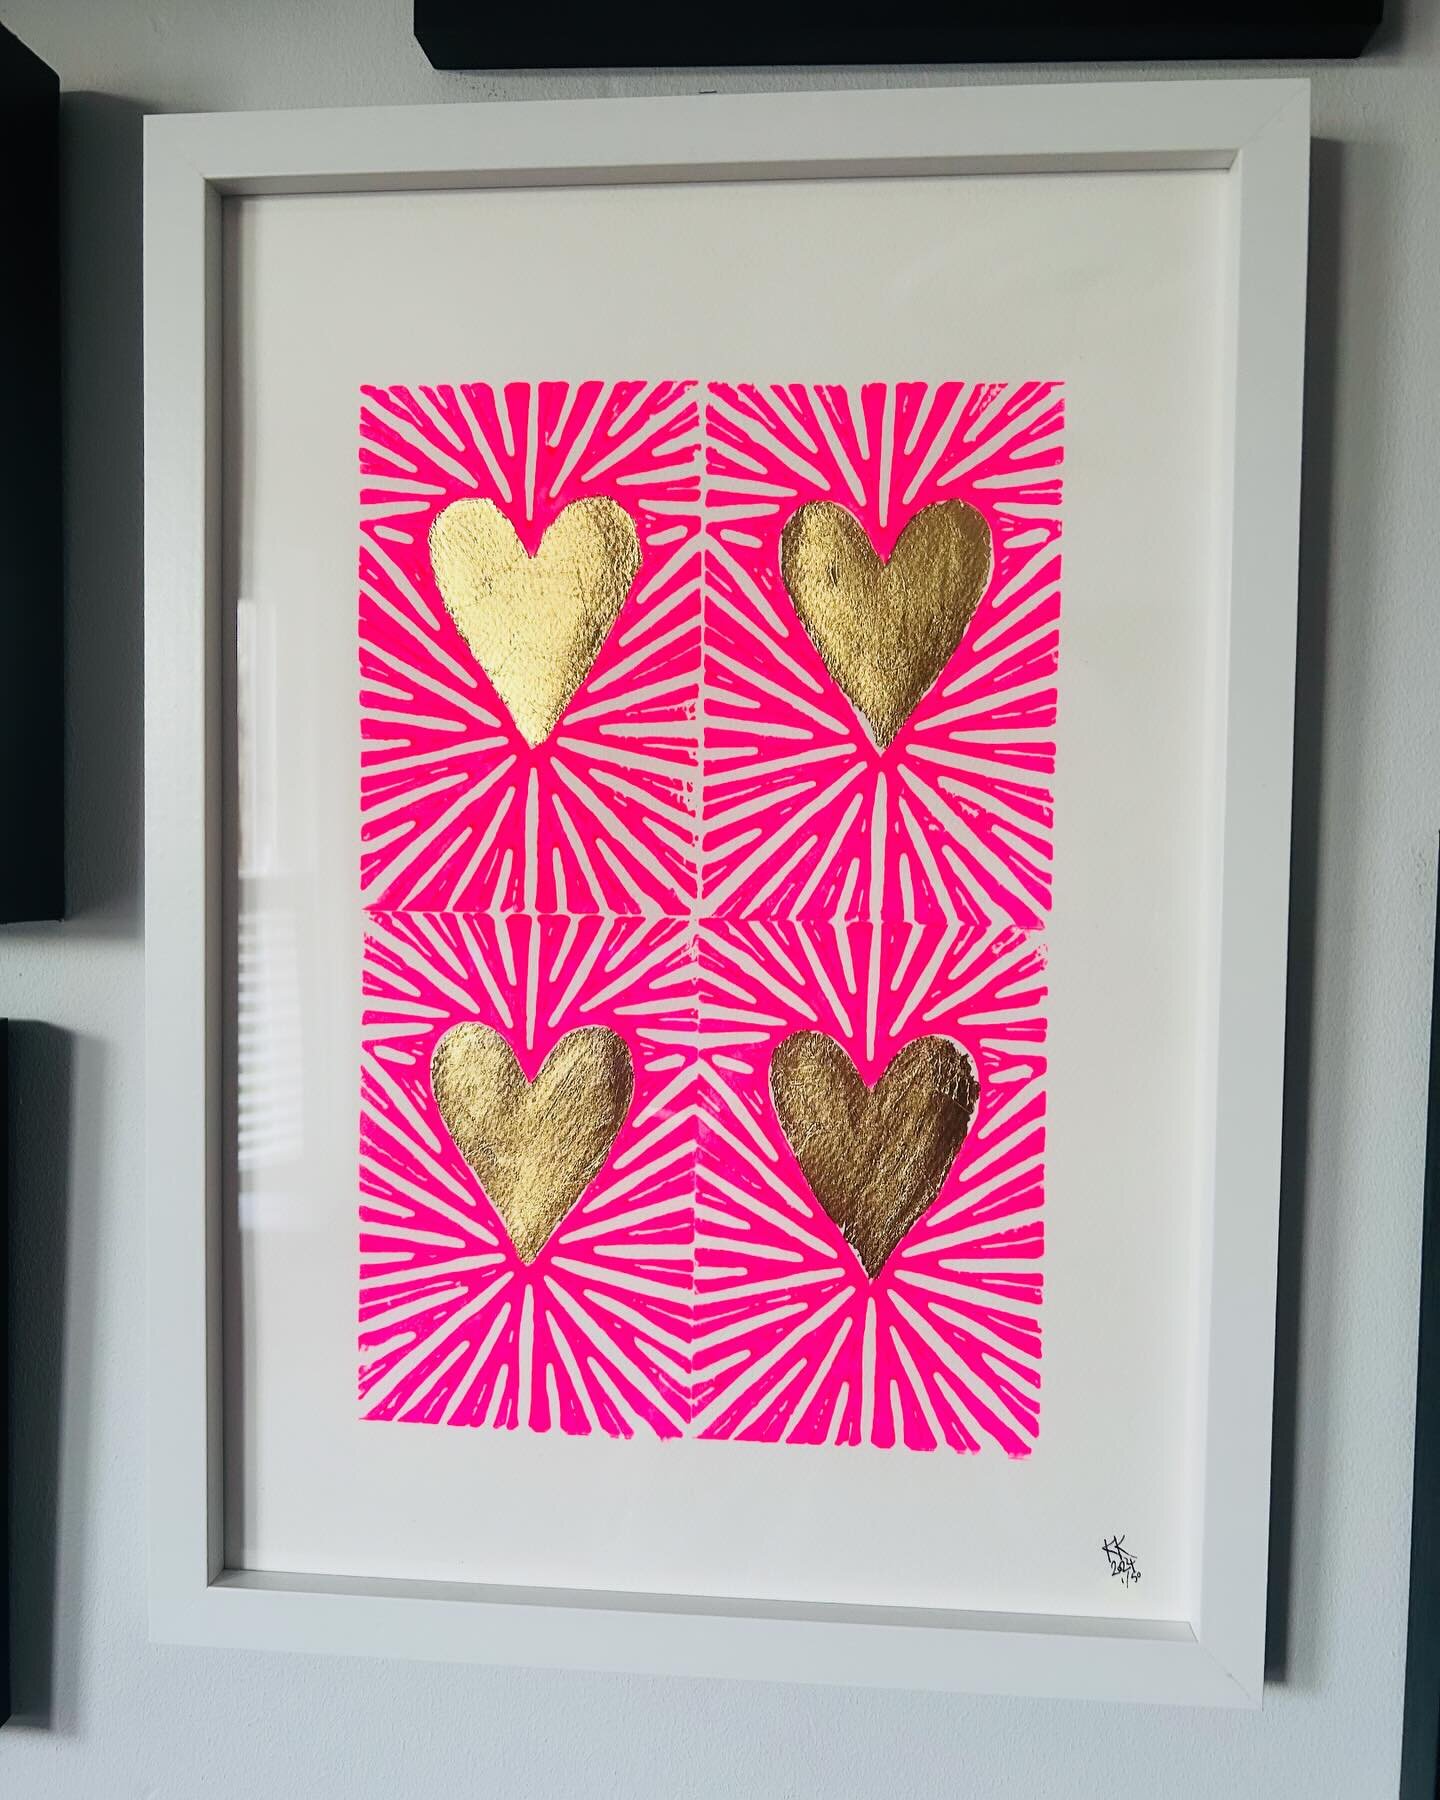 NEW ART ~ &lsquo;KIND HEARTS&rsquo; 💛💛💛💛 A3 Fluro lino prints with gold foil hearts &bull; Limited to x50 pieces only. Link in bio to shop 🔝 || This is the first in a series&hellip; my aim is to launch a new original piece of art on the 1st day 